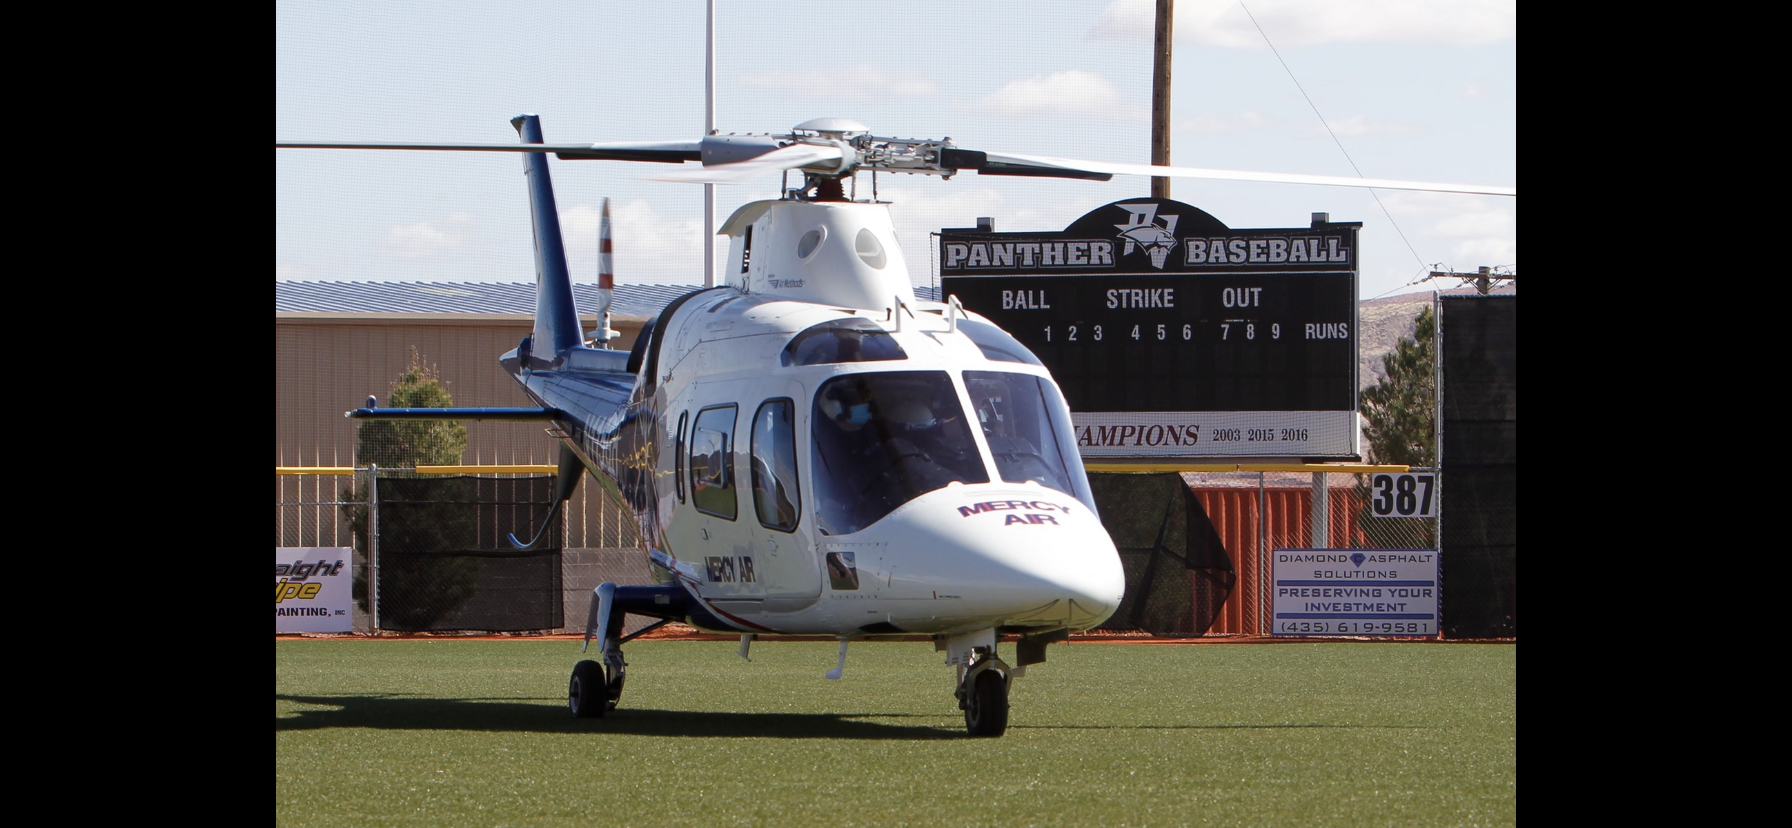 Helicopter on the baseball field